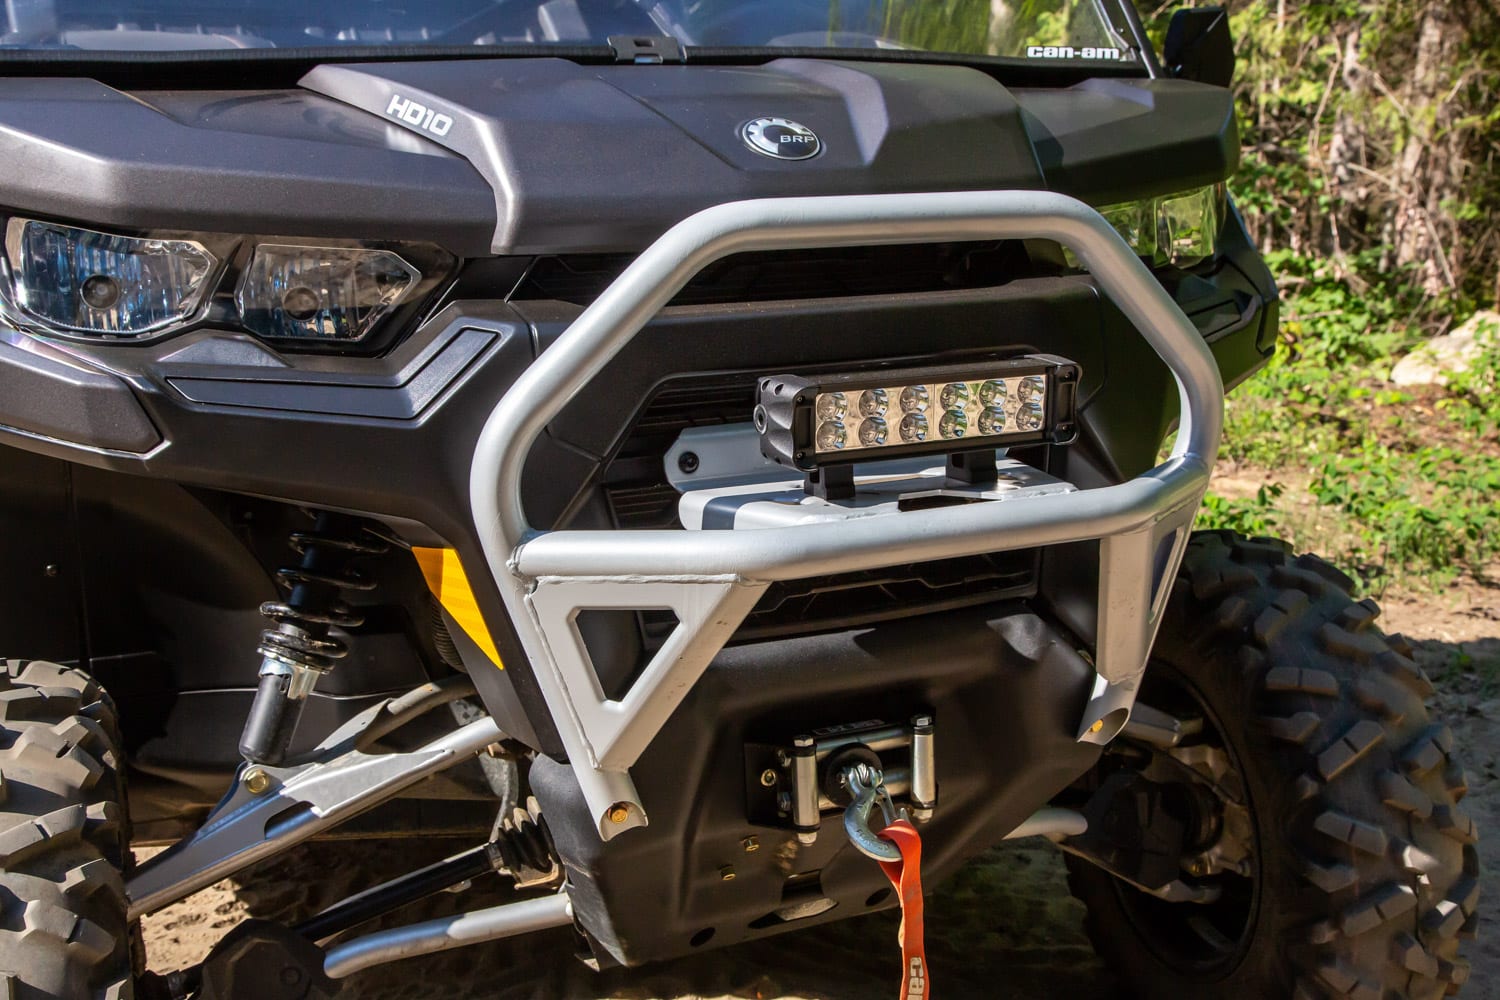 2020 Can-Am Defender XT-P HD10 Review